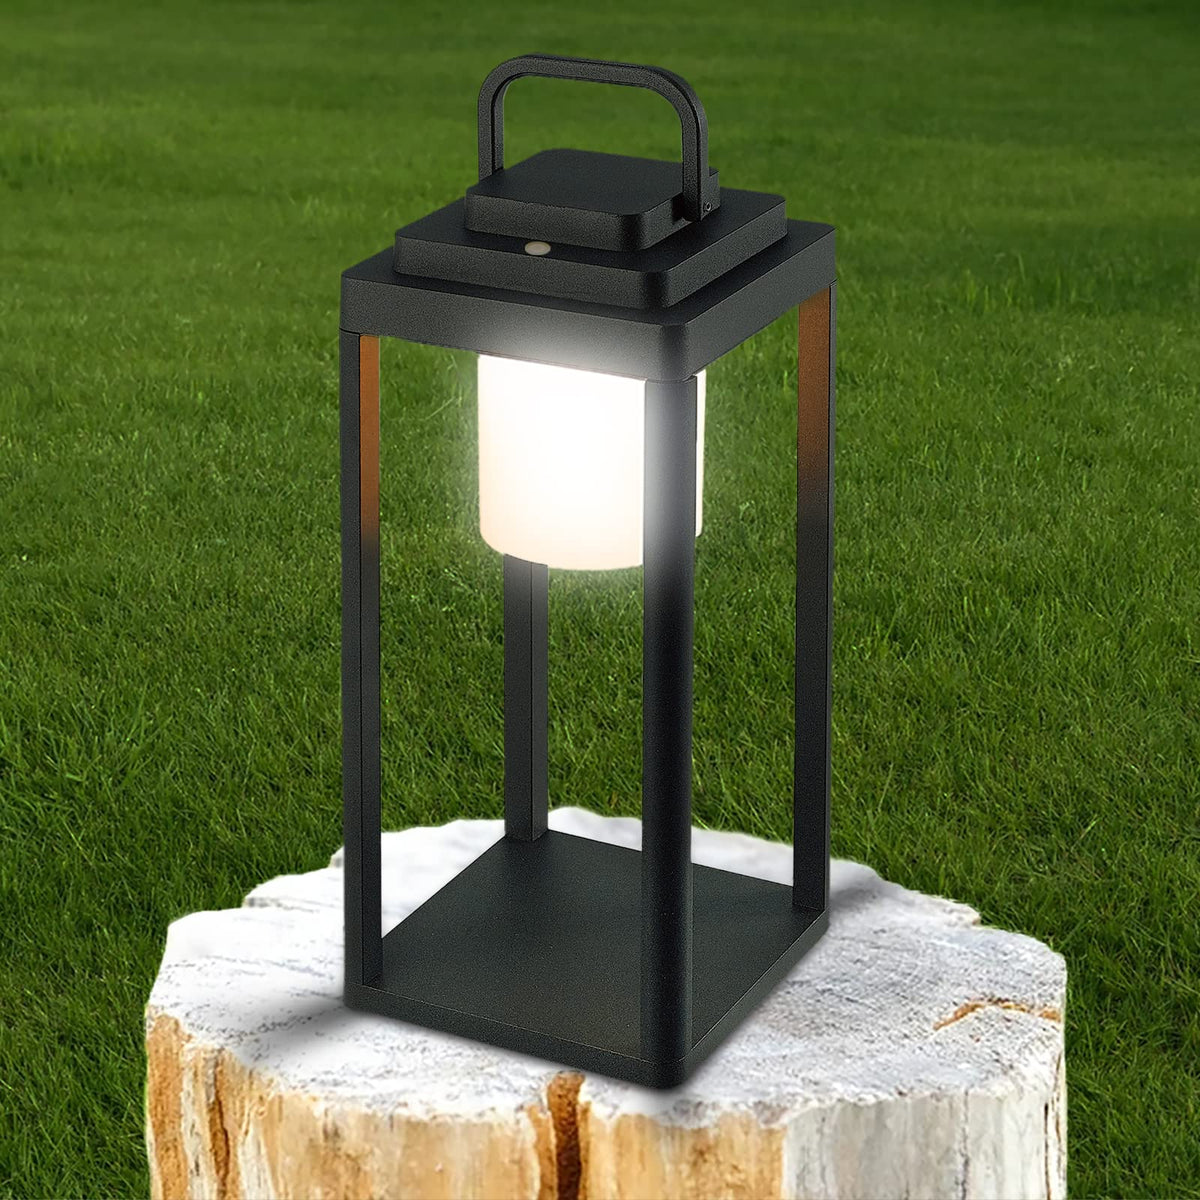 BRIMMEL Solar Outdoor Lantern Aluminum LED Portable Rechargeable Solar Table Lamp 35W 3000K Outdoor Nightstand Lamp IP44 Waterproof Cordless Touch